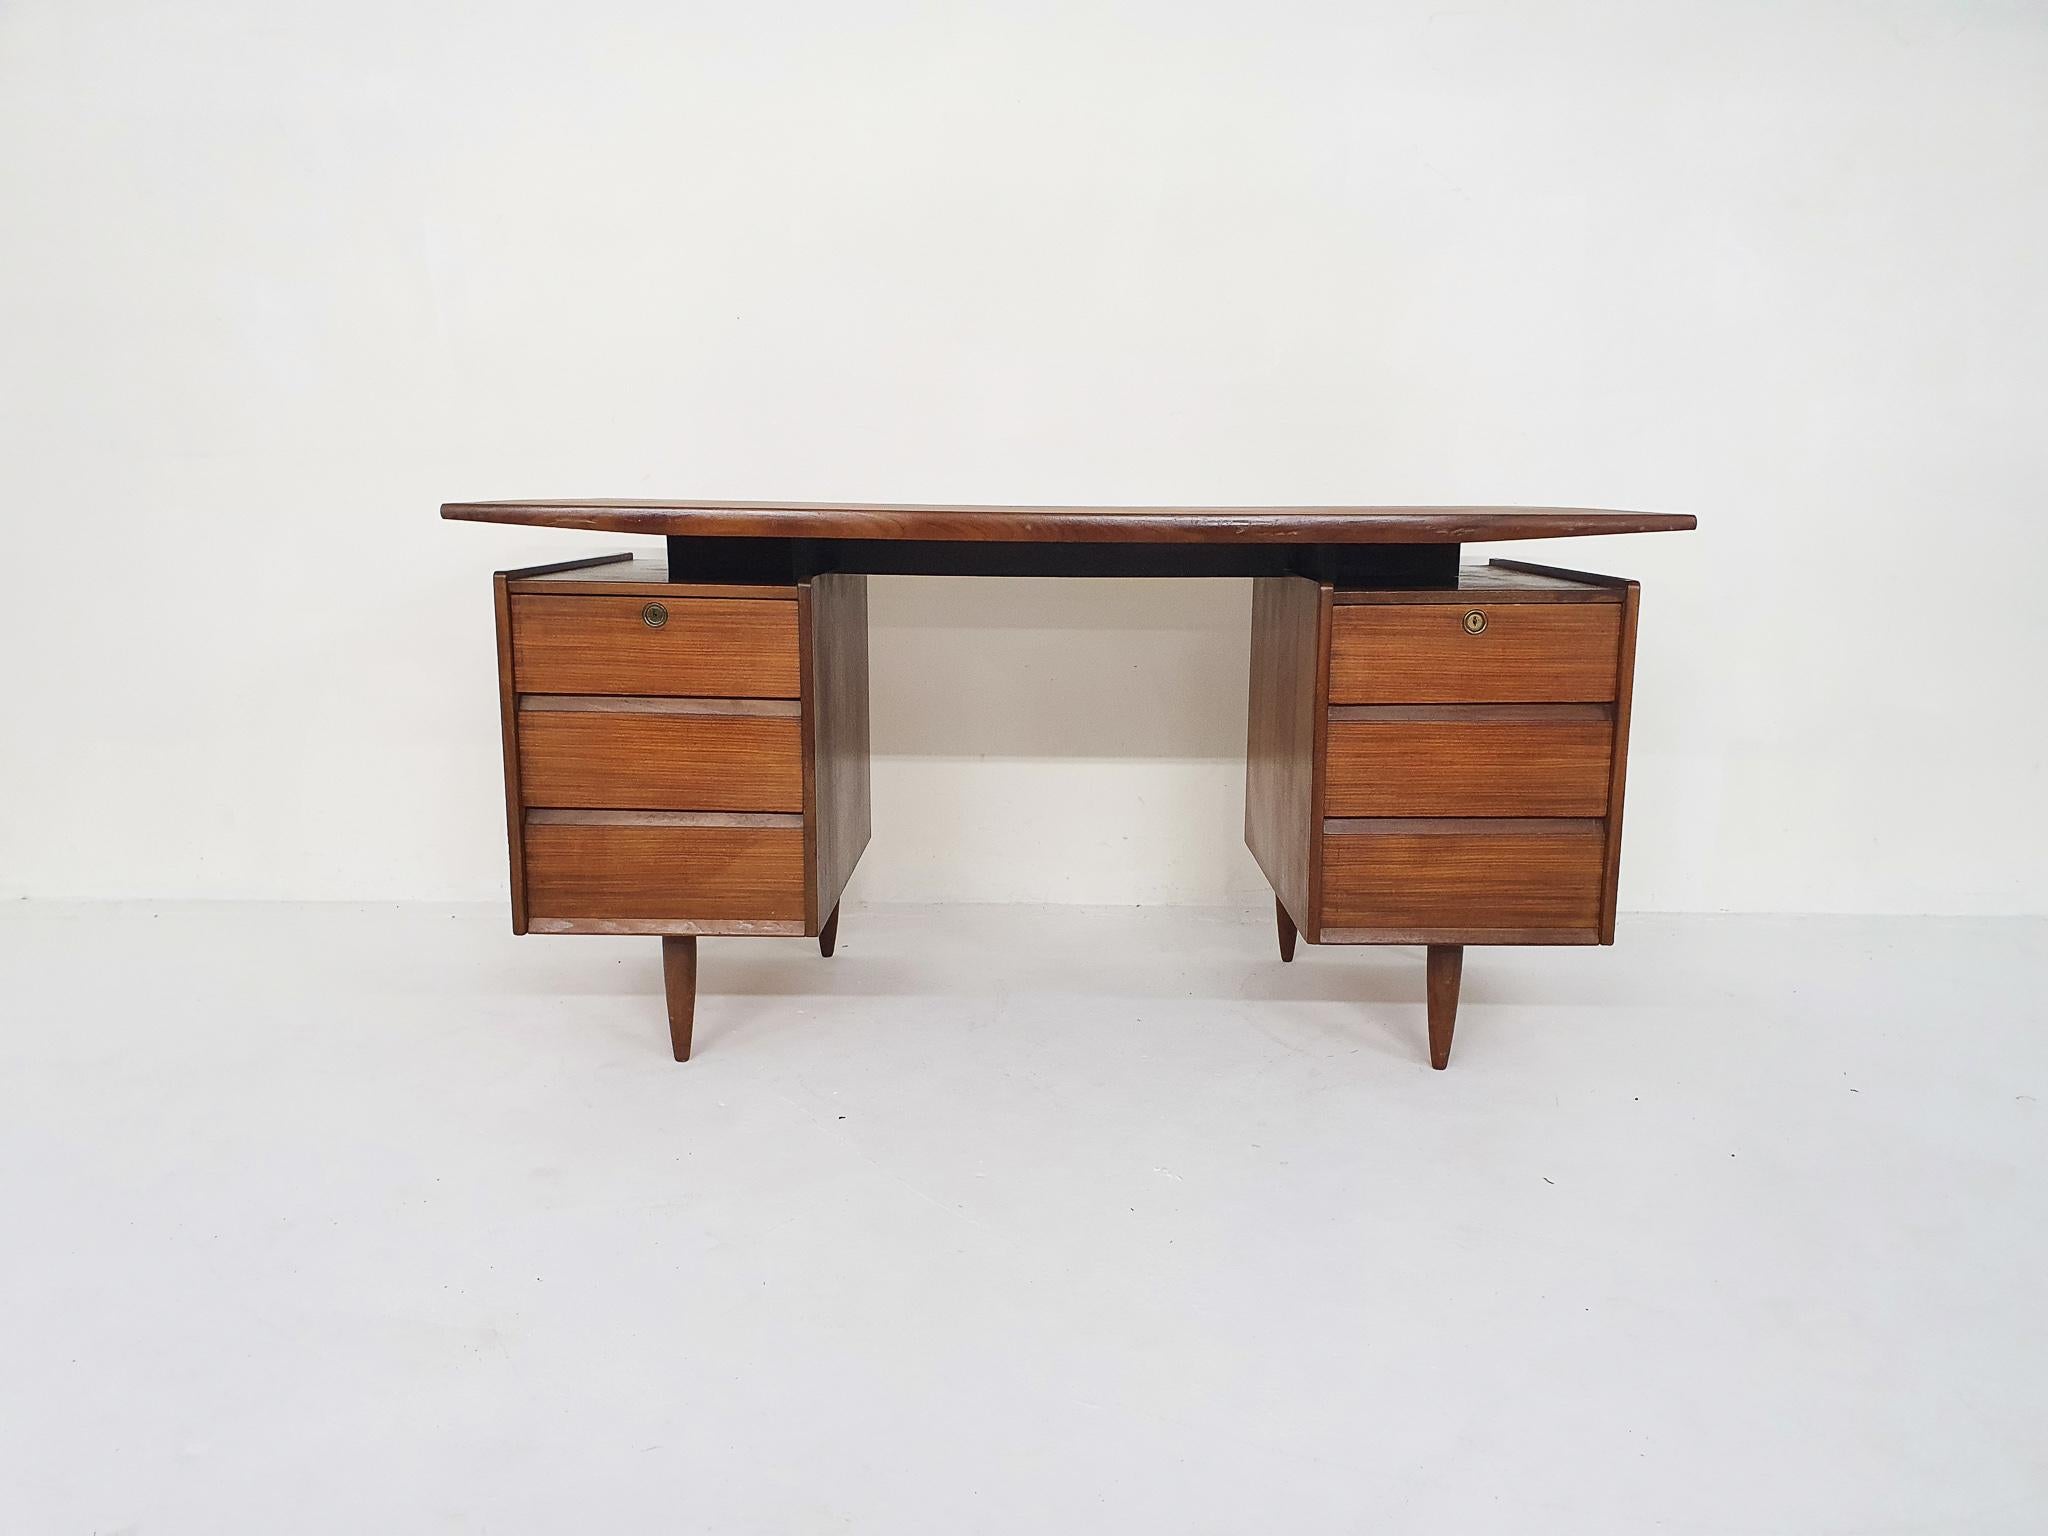 Teak veneer desk with drawers which can be locked. The top has been sand and laquered
